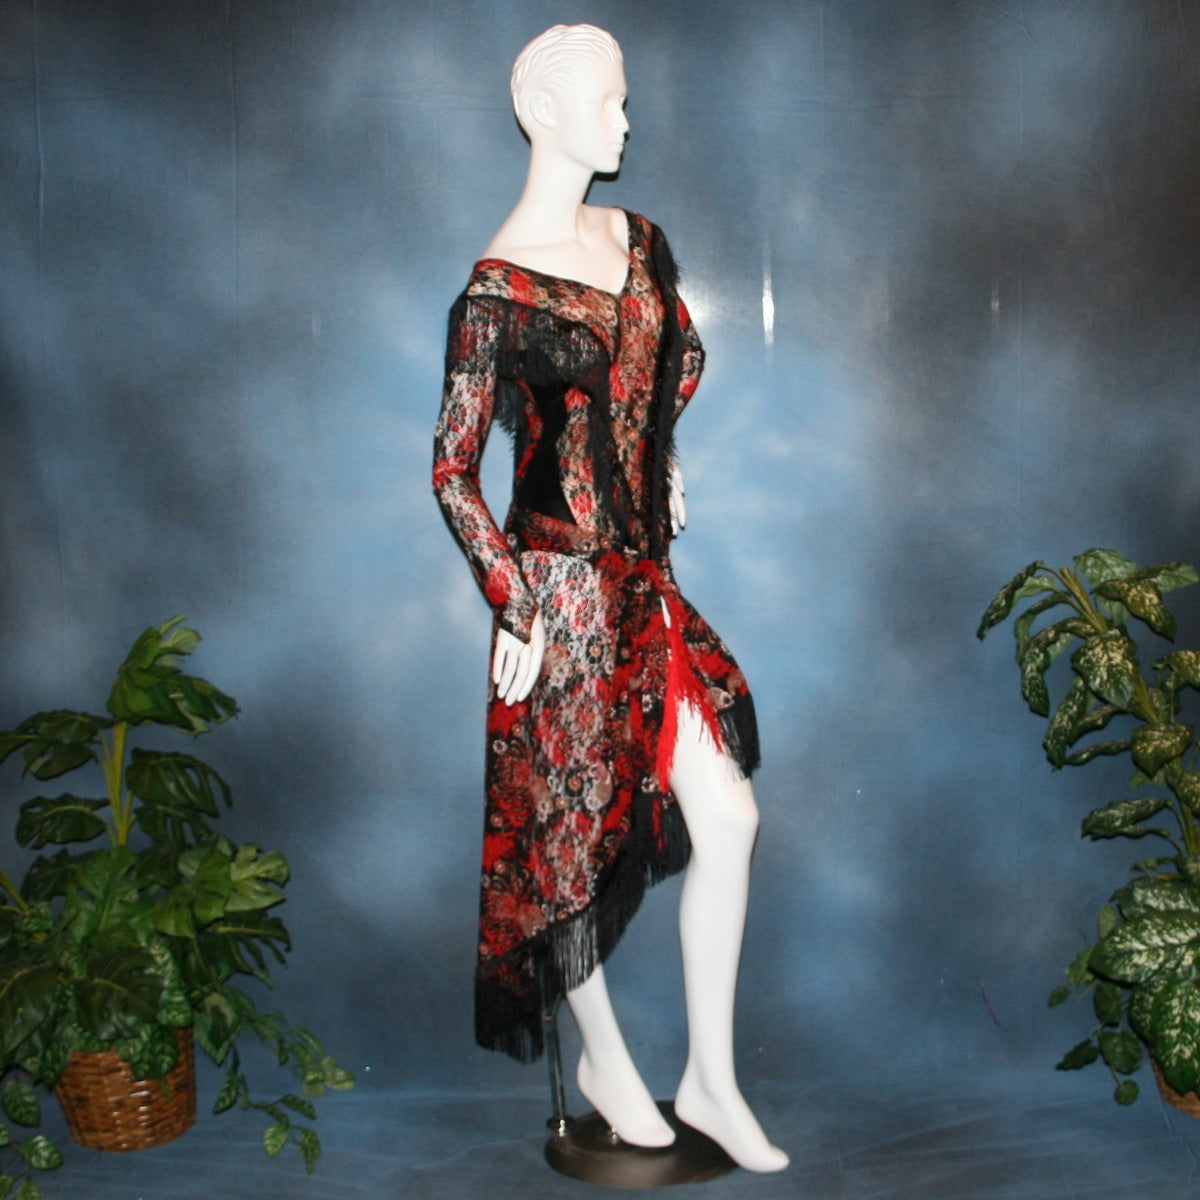 side view of Lace bodysuit & Latin/rhythm skirt created in red, black, and a touch of white stretch lace with chainette fringe trim. Fun dance set for any social ballroom dance, beginner ballroom showdance dress, or ballroom dance teachers!